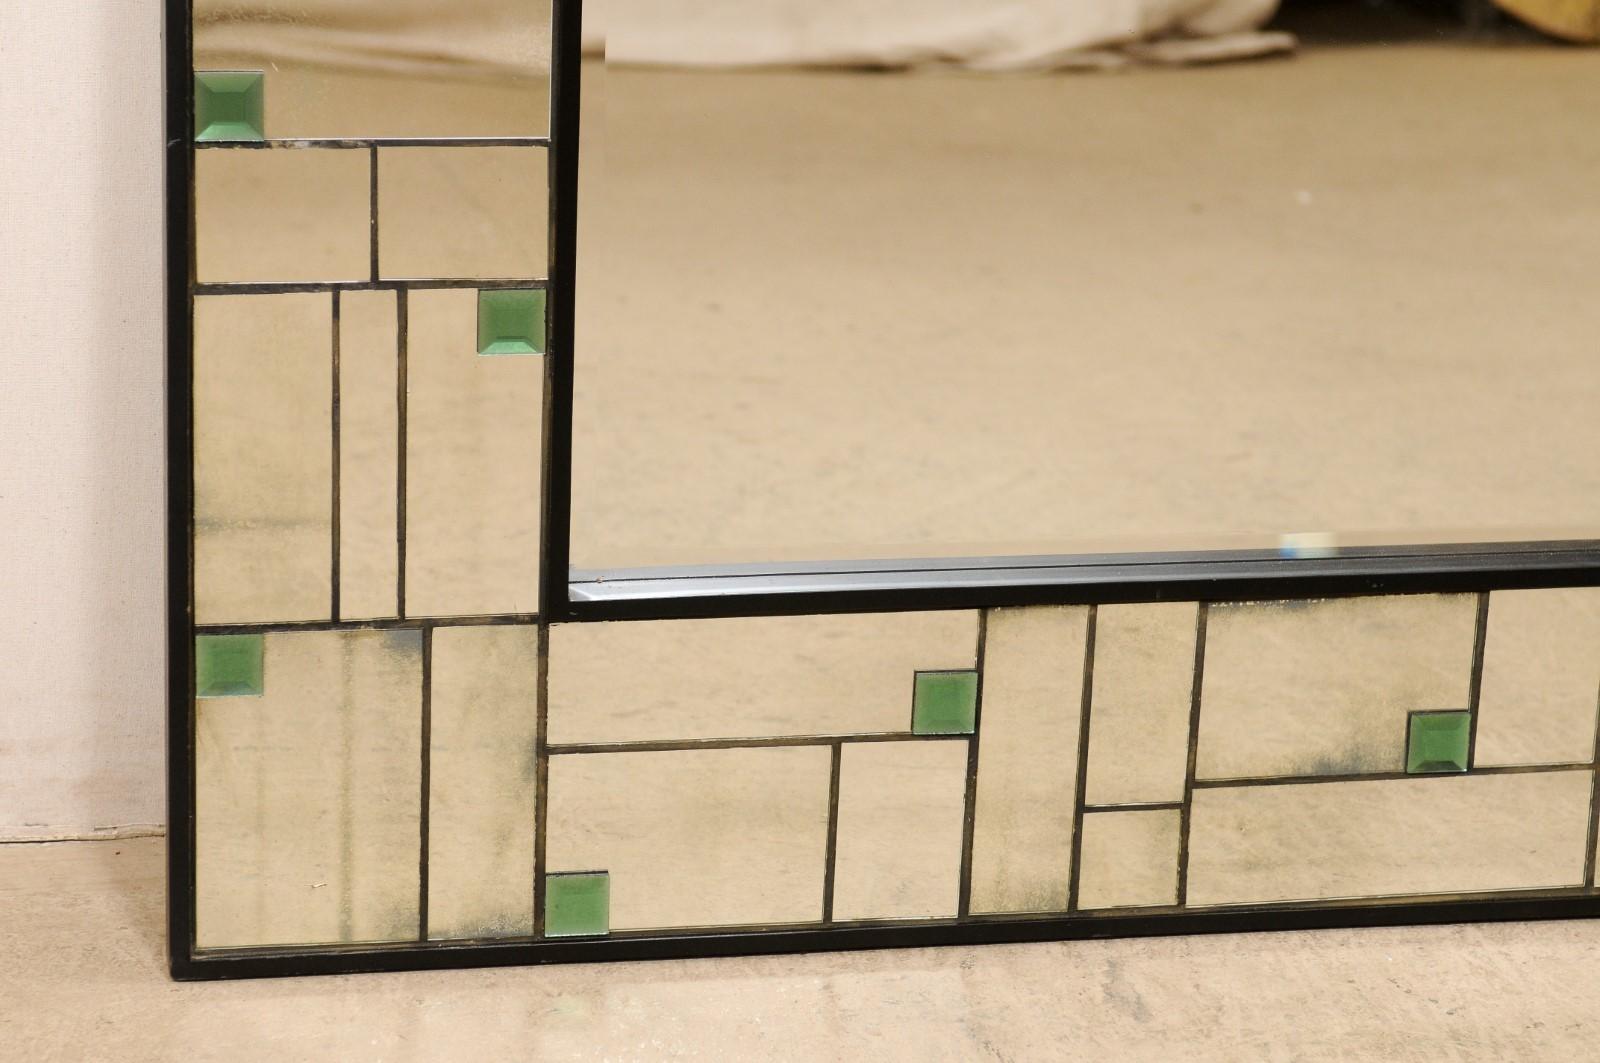 20th Century Large-Sized Mirror w/ Geometric Mirror Border & Green Colored Accents For Sale